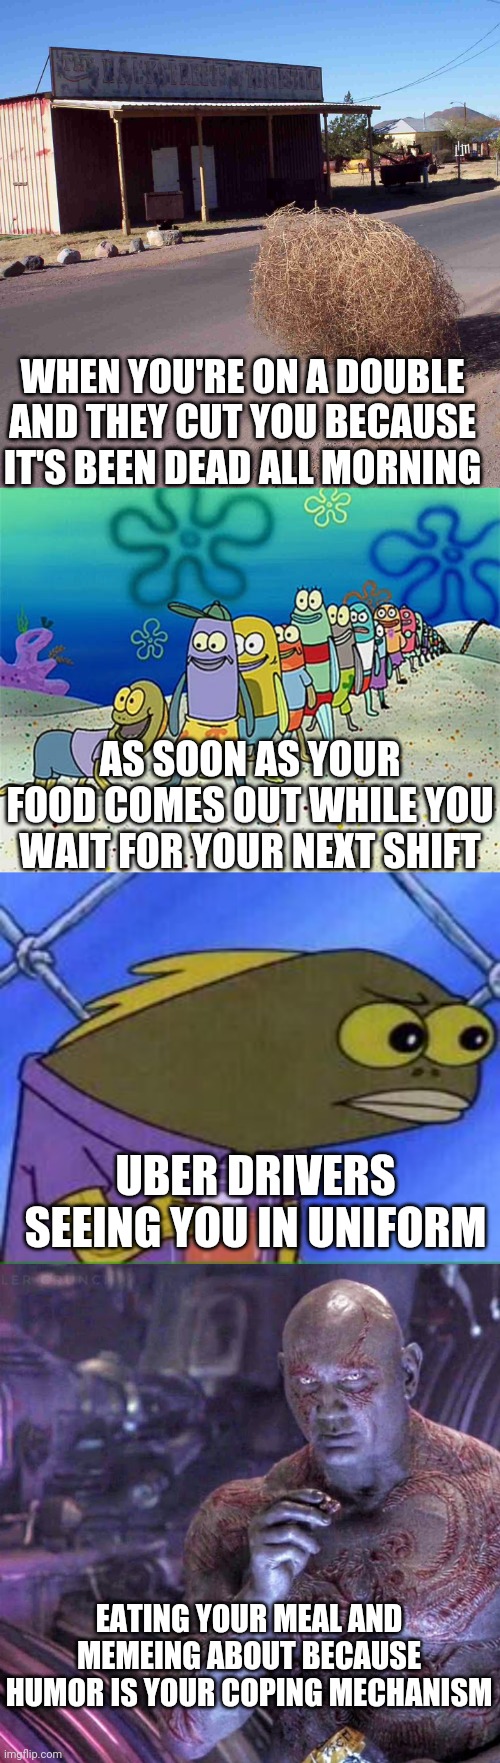 Eating on break | WHEN YOU'RE ON A DOUBLE AND THEY CUT YOU BECAUSE IT'S BEEN DEAD ALL MORNING; AS SOON AS YOUR FOOD COMES OUT WHILE YOU WAIT FOR YOUR NEXT SHIFT; UBER DRIVERS SEEING YOU IN UNIFORM; EATING YOUR MEAL AND MEMEING ABOUT BECAUSE HUMOR IS YOUR COPING MECHANISM | image tagged in tumbleweed,drax facts,just server things | made w/ Imgflip meme maker